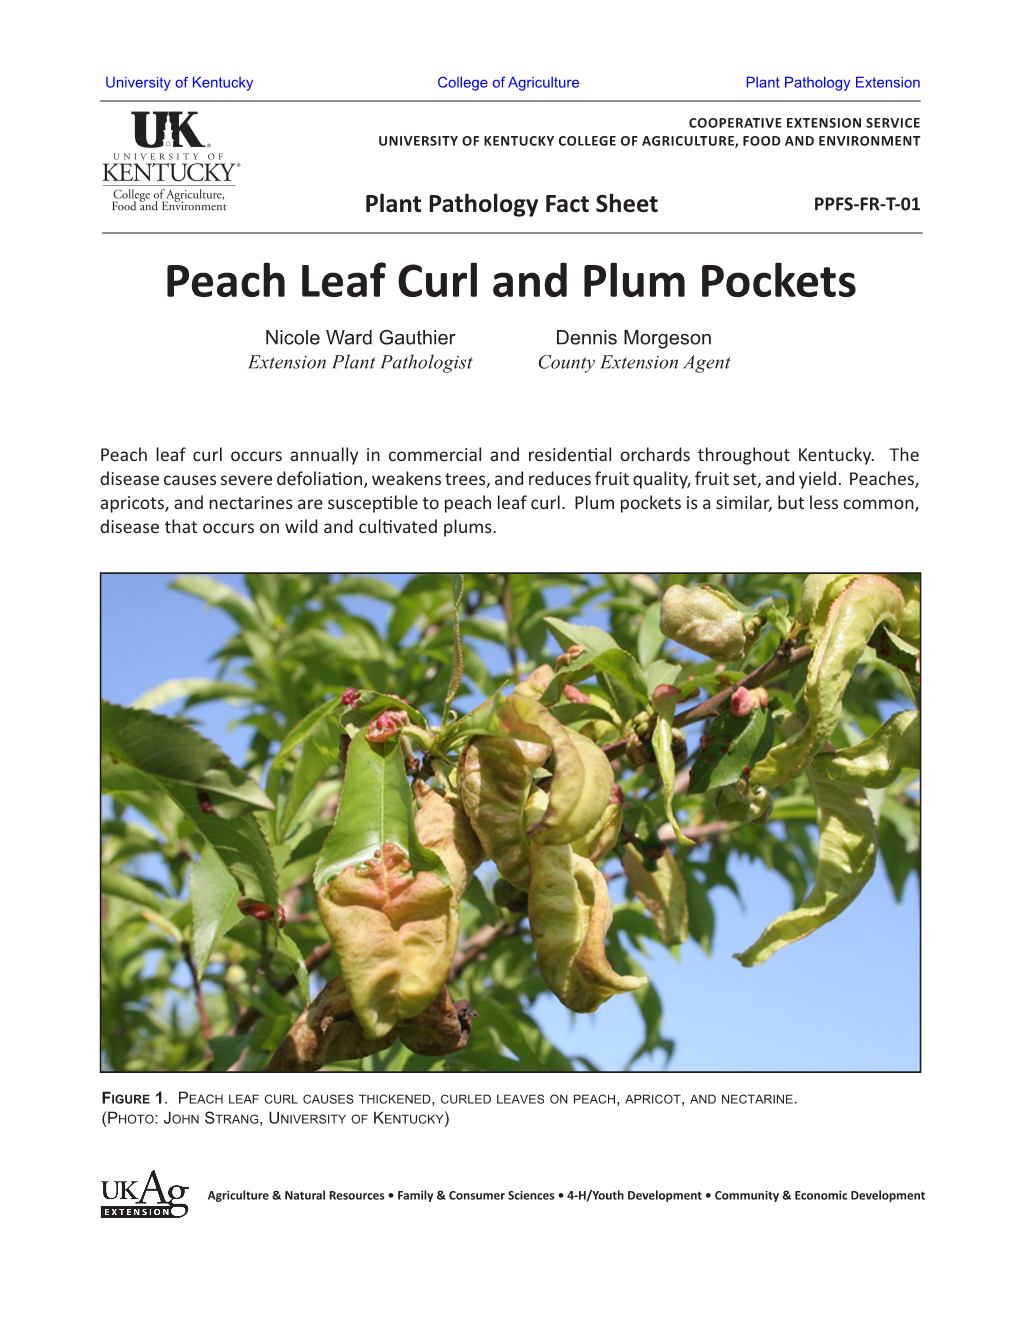 Peach Leaf Curl and Plum Pockets Nicole Ward Gauthier Dennis Morgeson Extension Plant Pathologist County Extension Agent